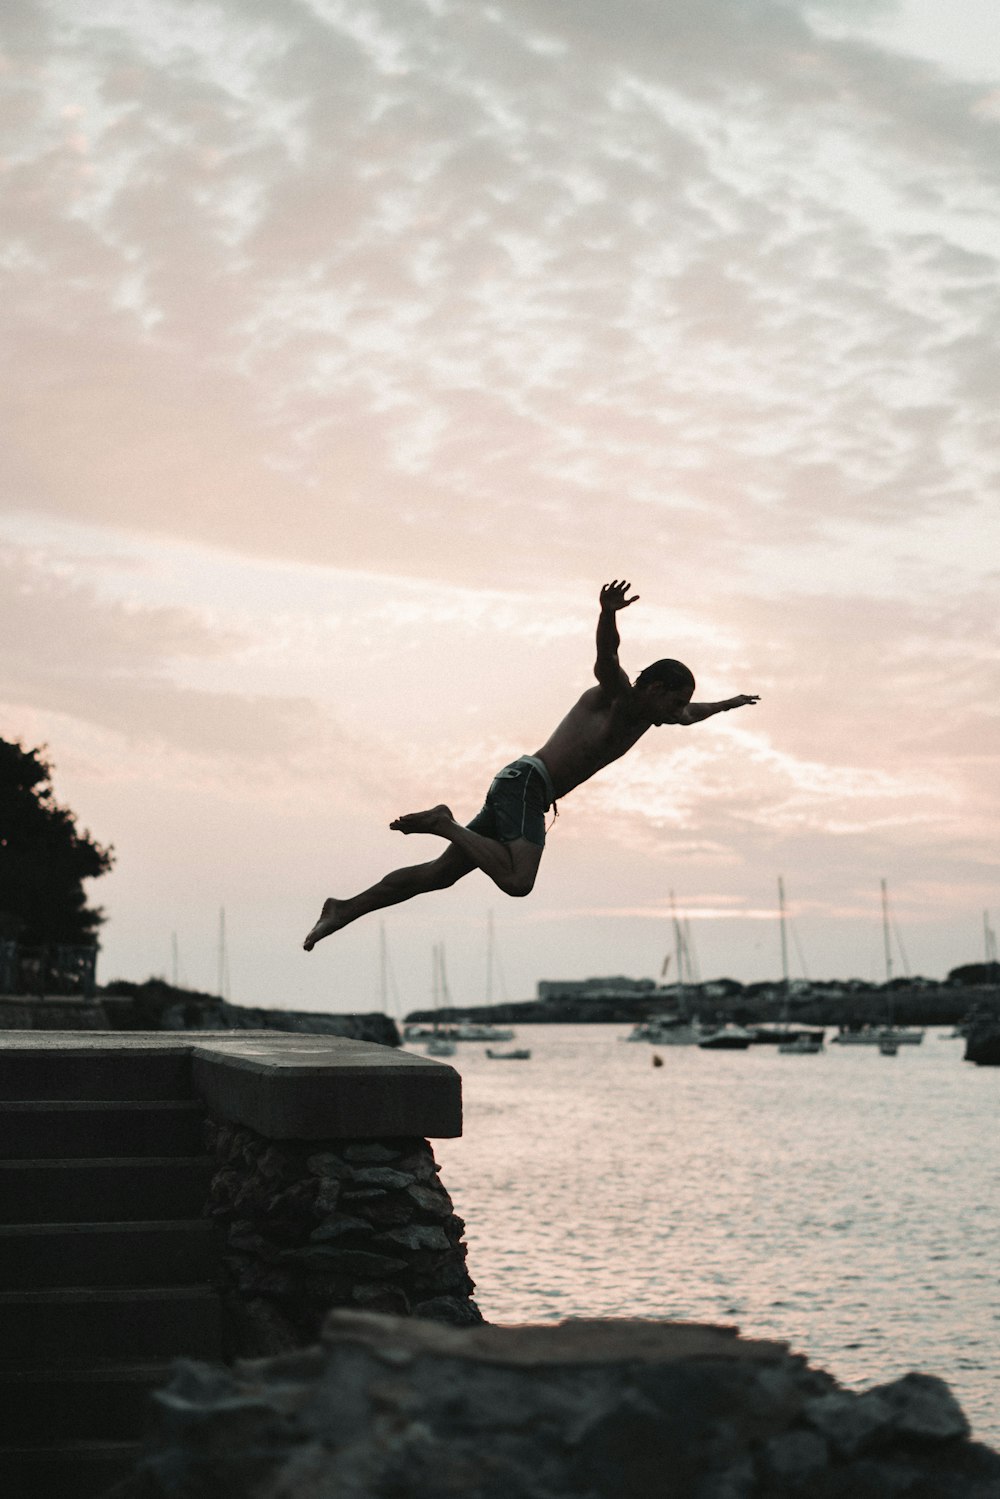 a person jumping into the water from a dock